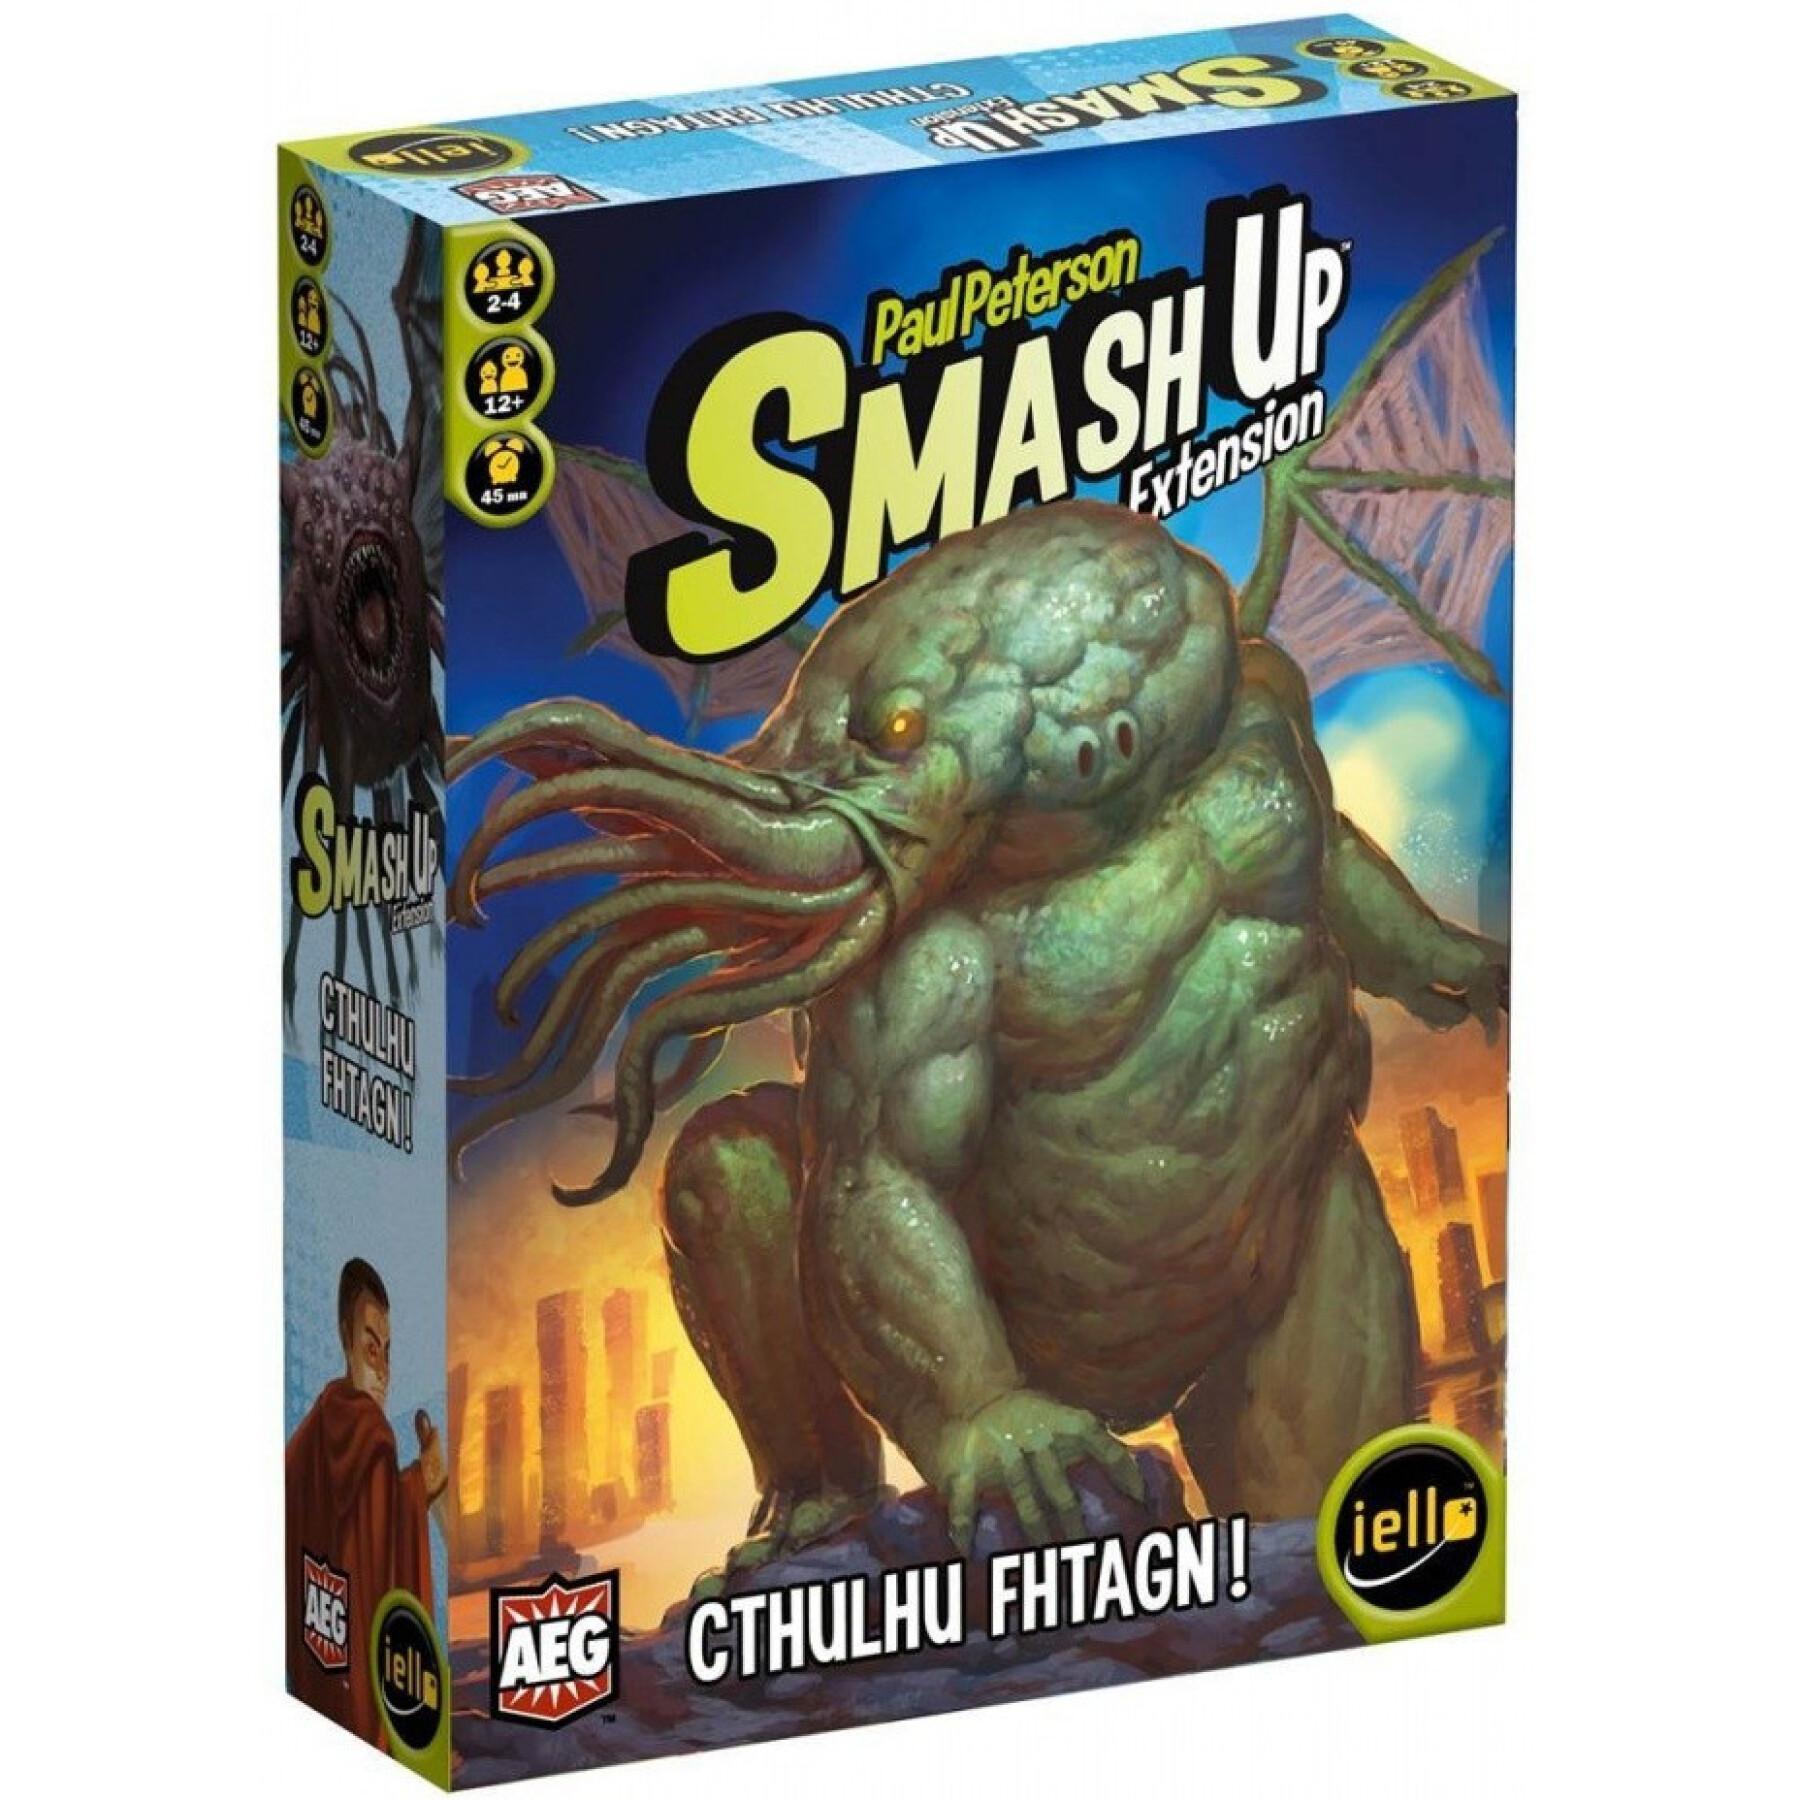 Board games ext.2 IELLO Smash Up - Cthulhu Fhtagn